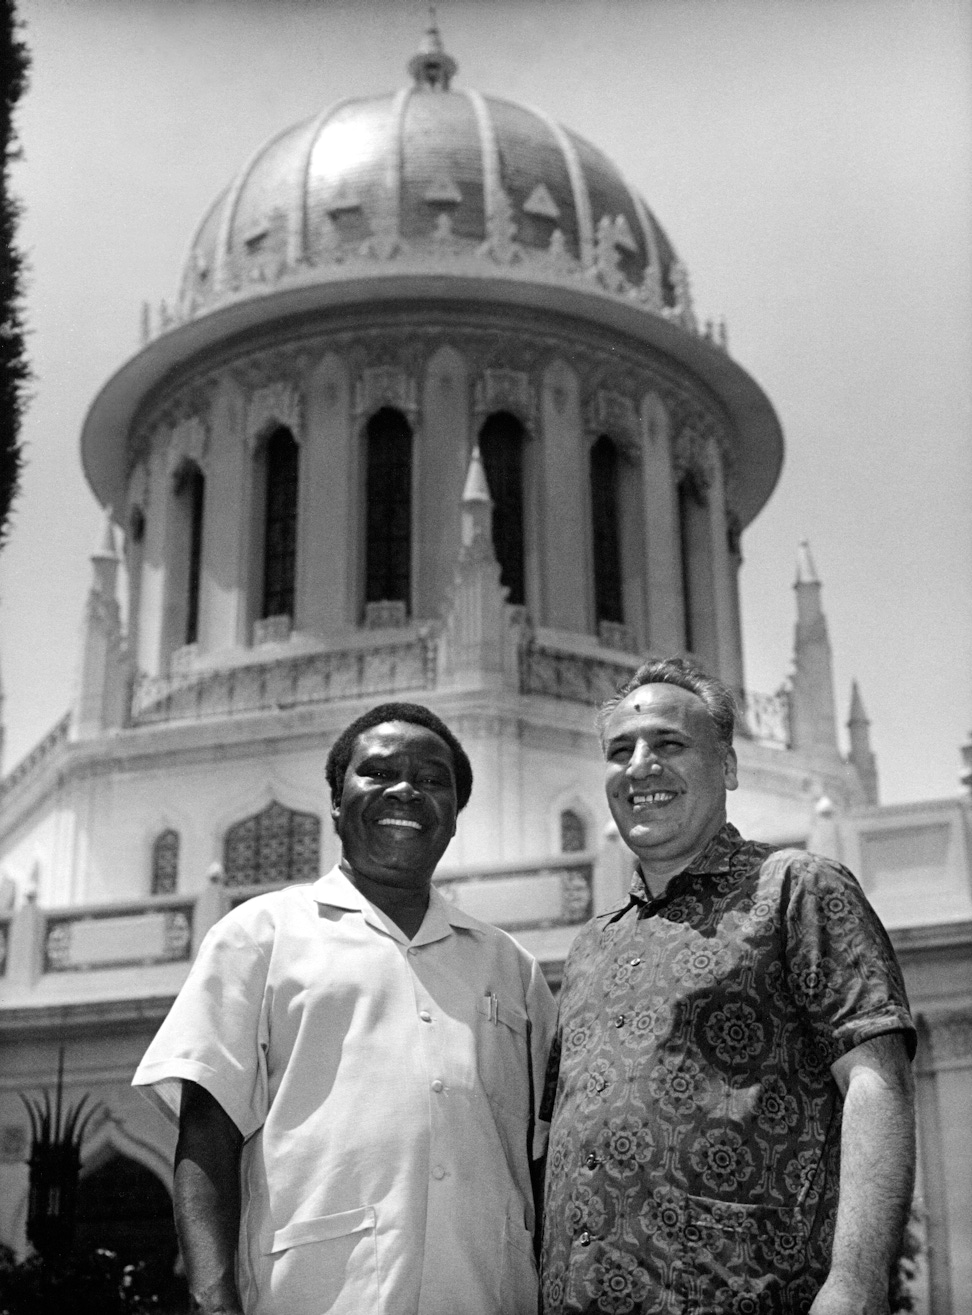 Hands of the Cause Enoch Olinga (left) and Rahmatu’lláh Muhájir (right) in front of the Shrine of the Báb, 1973